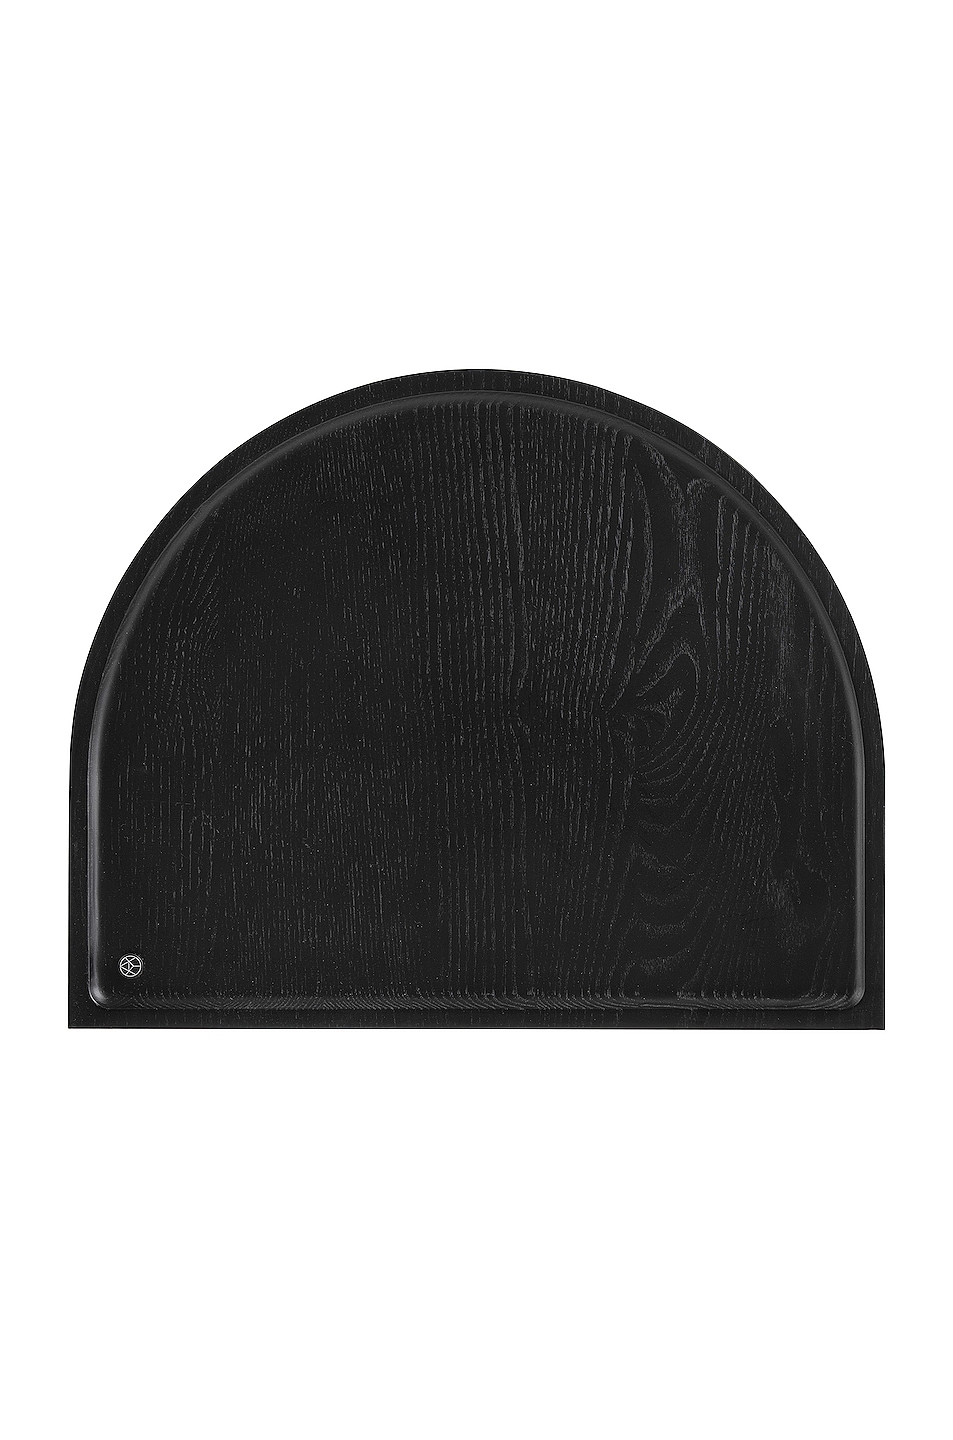 Image 1 of AYTM Sessio Rounded Tray in Black